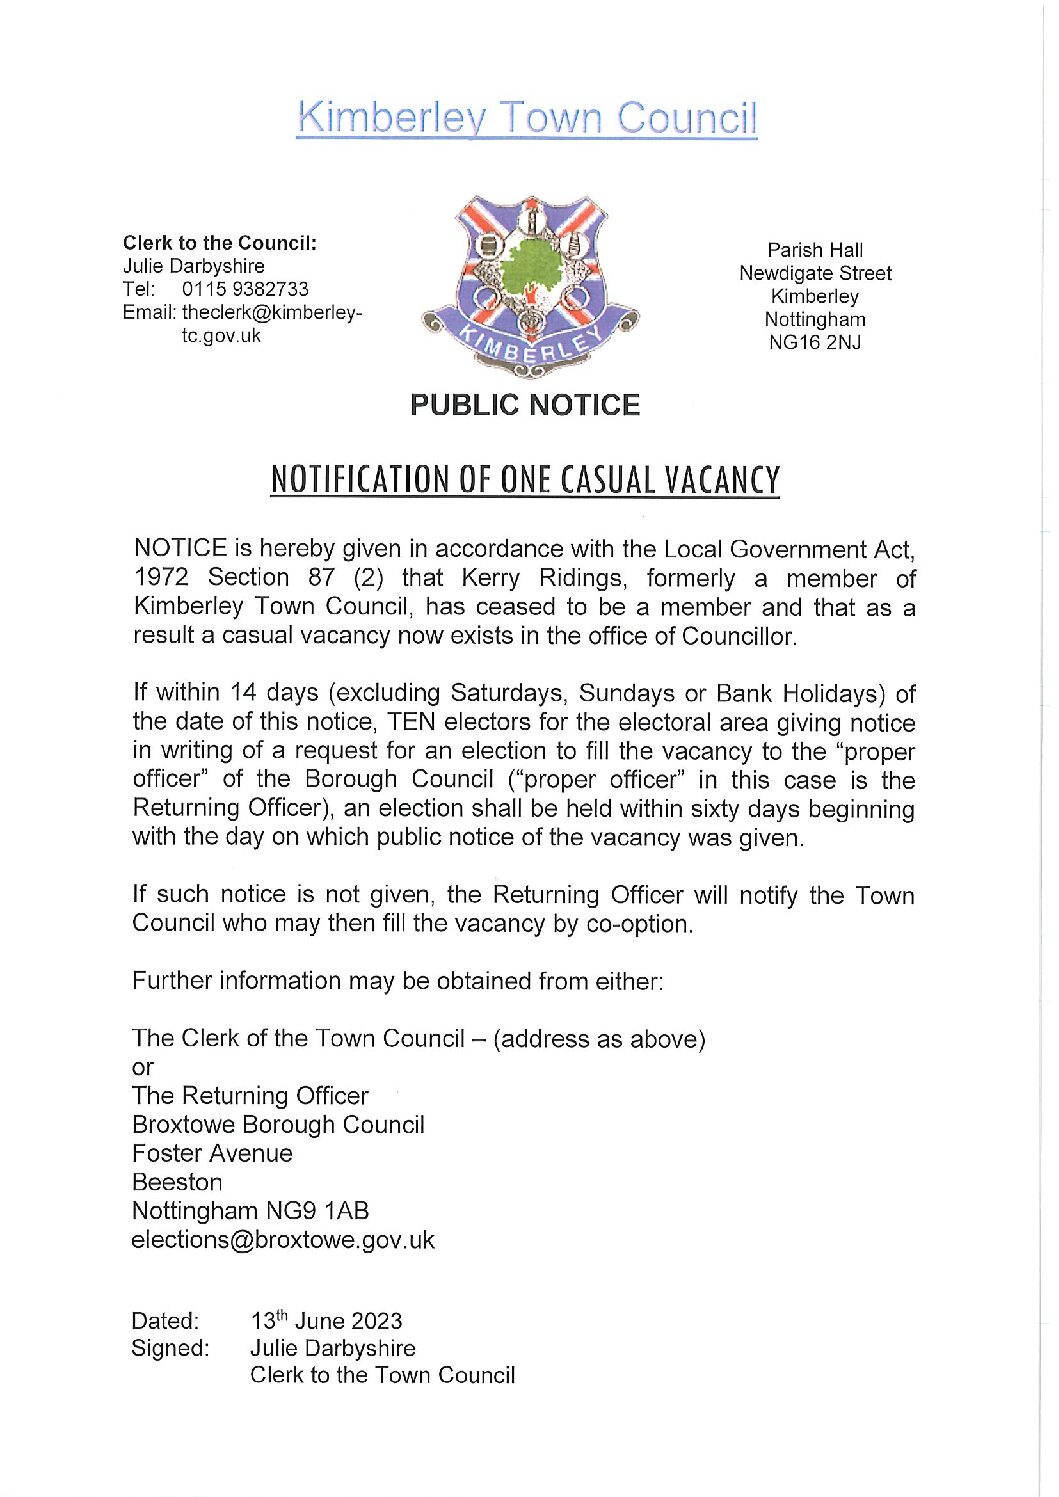 Notification of One Casual Vacancy